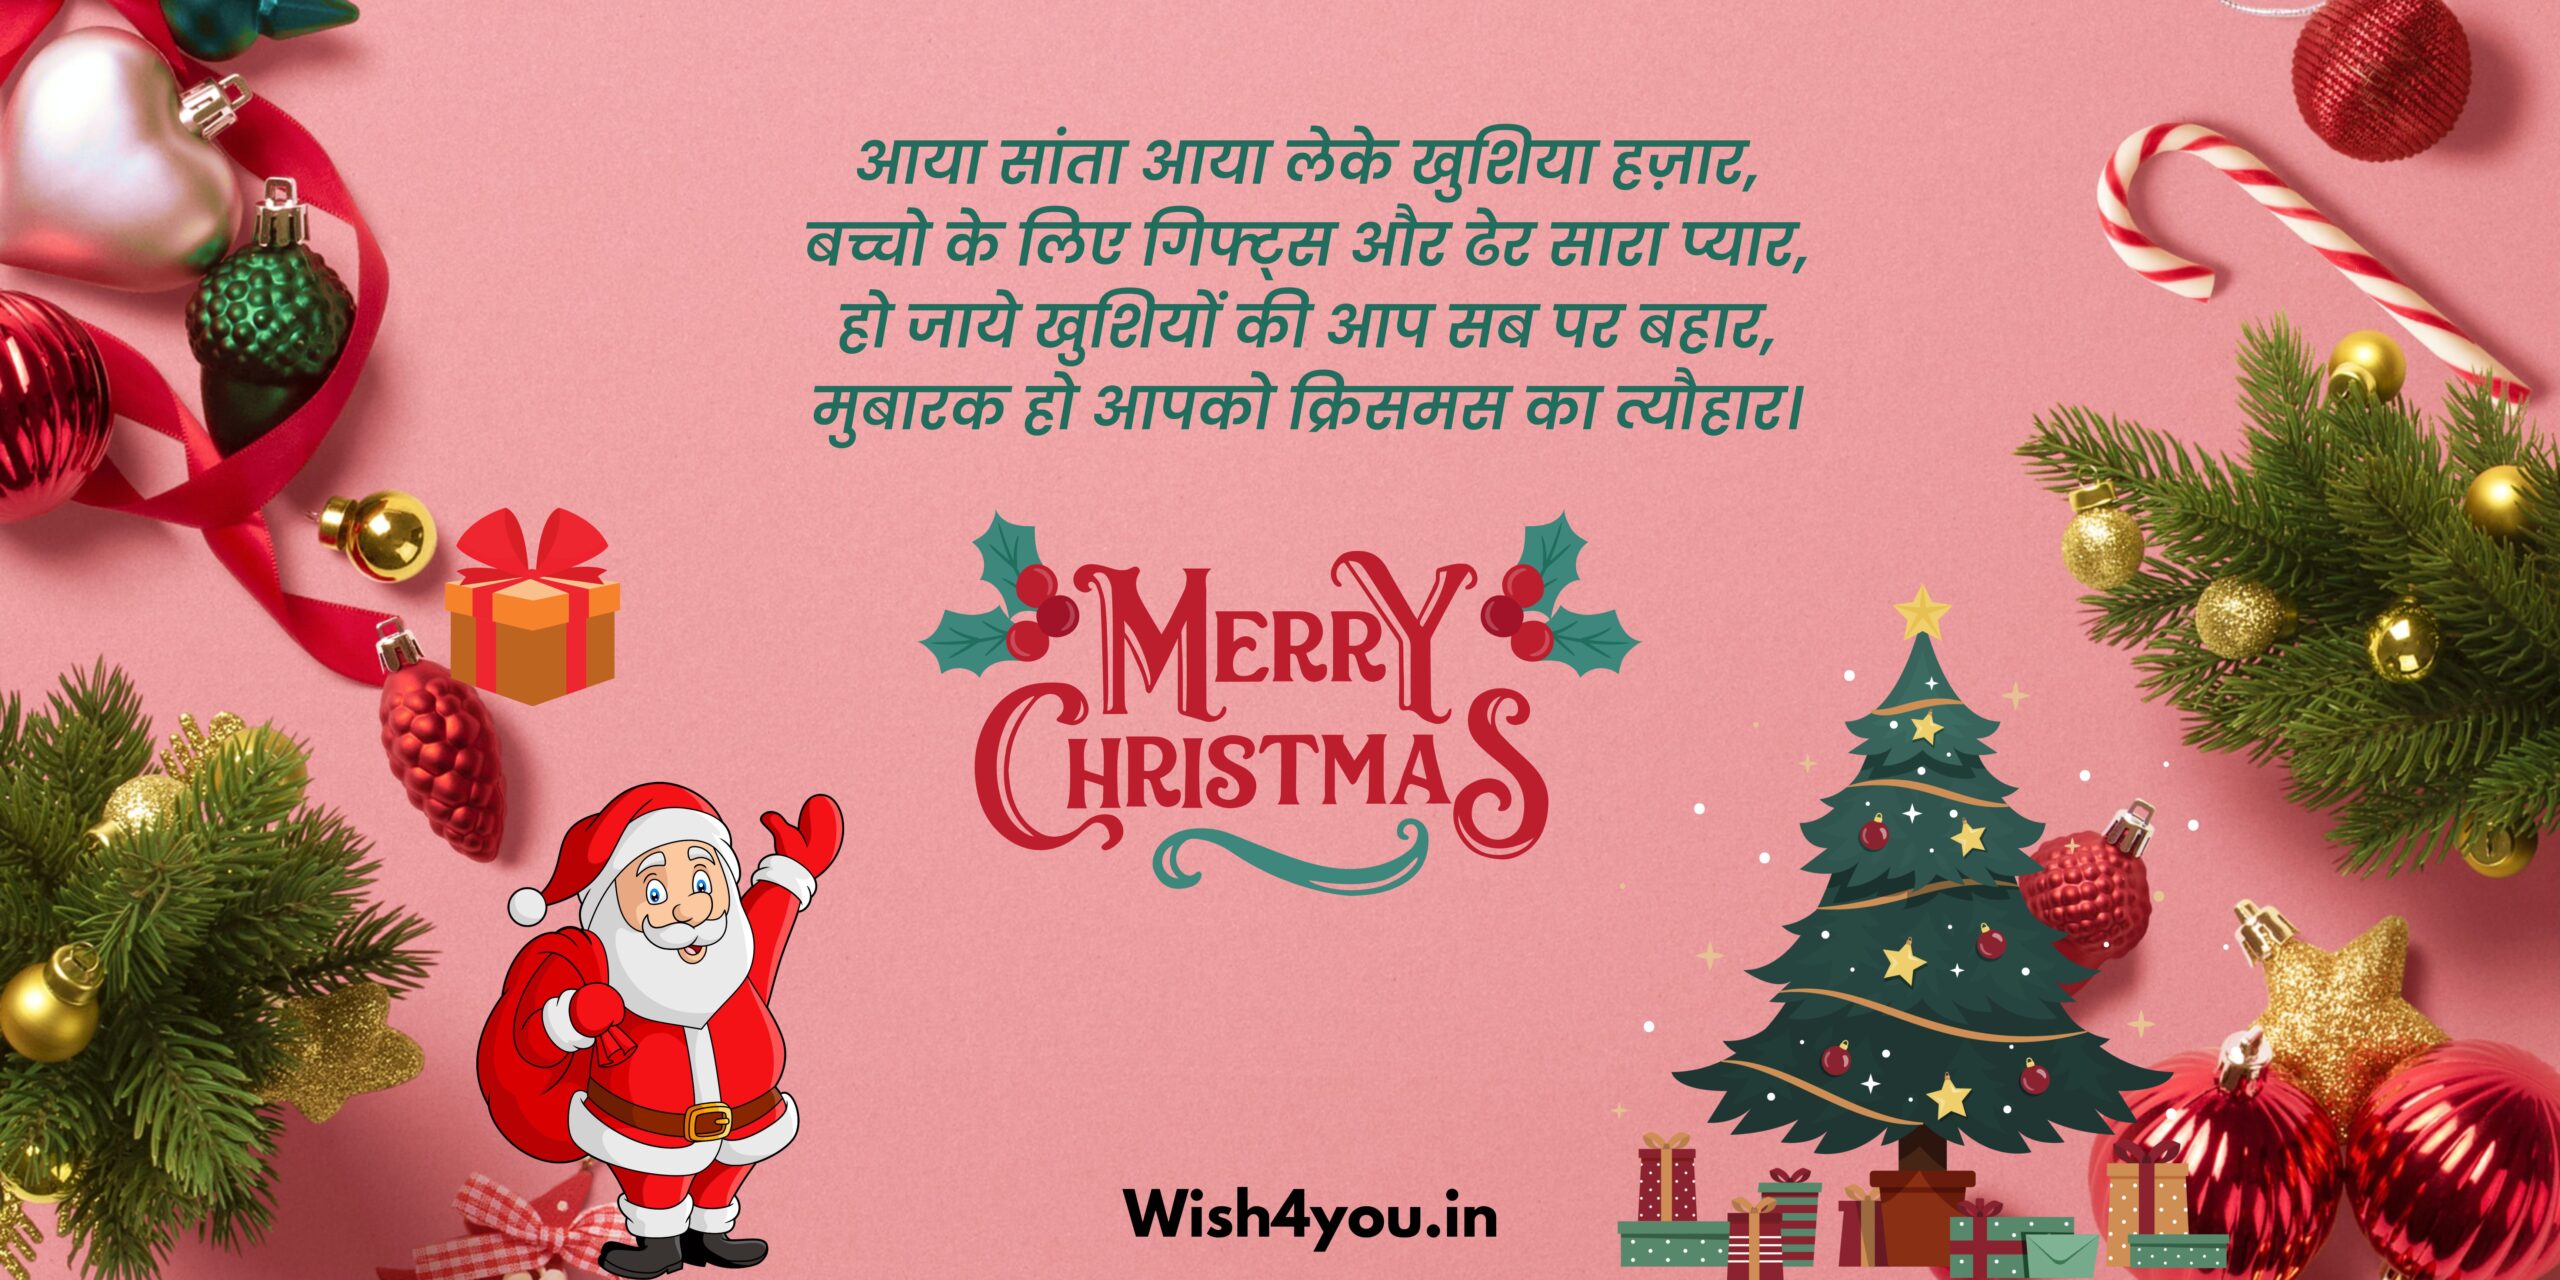 Best Wishes Marry Christmas 2022 in Hindi